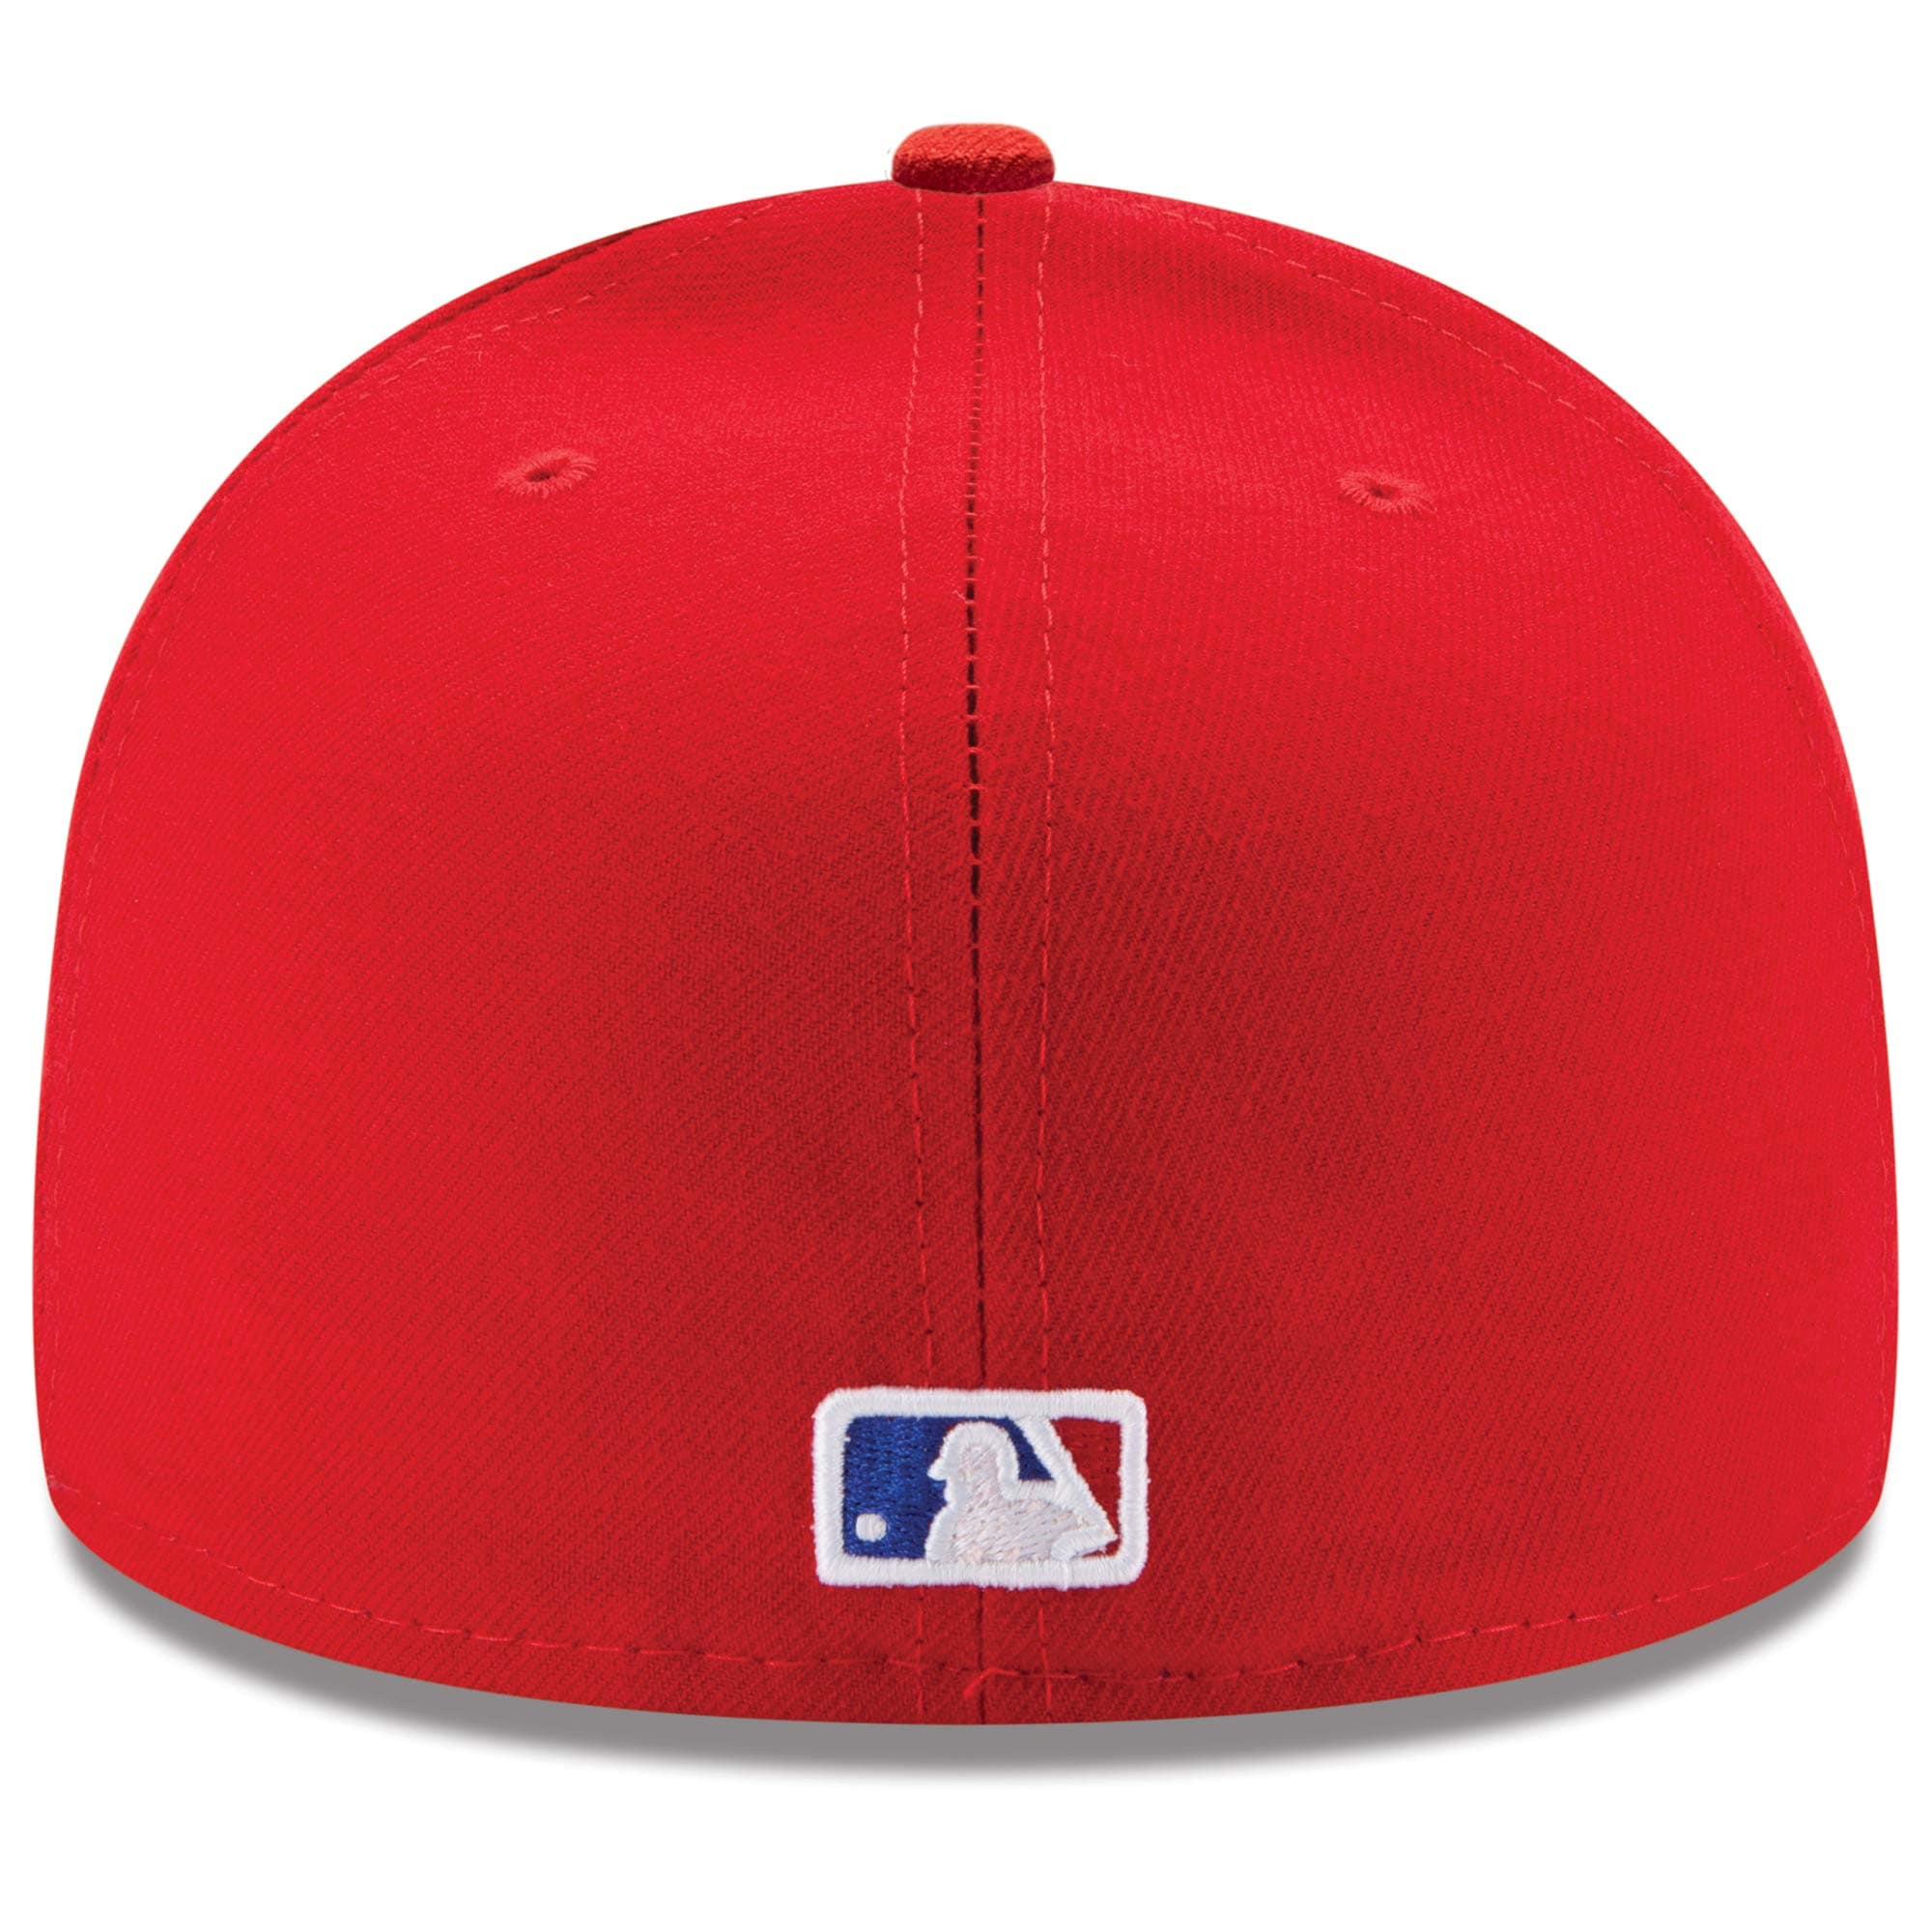 Men's New Era Red Texas Rangers Alternate Authentic Collection On-Field 59FIFTY Fitted Hat - image 4 of 4